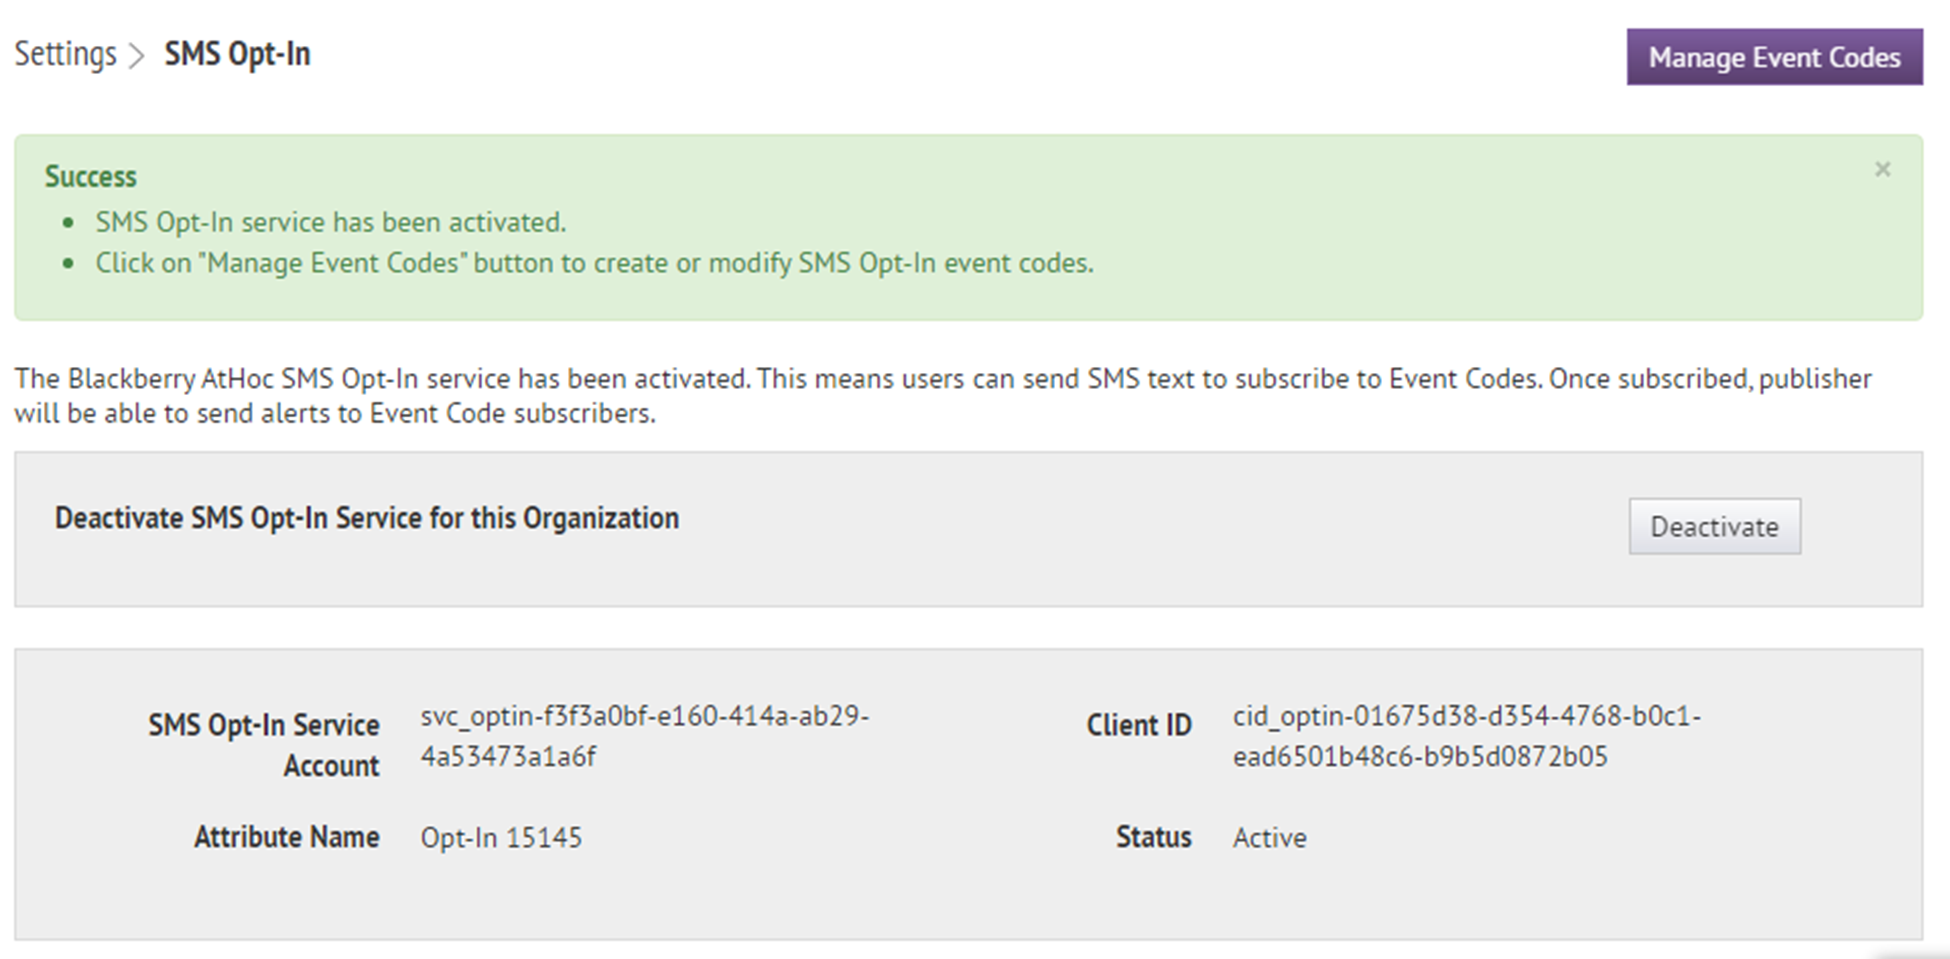 SMS Opt-In activation successful